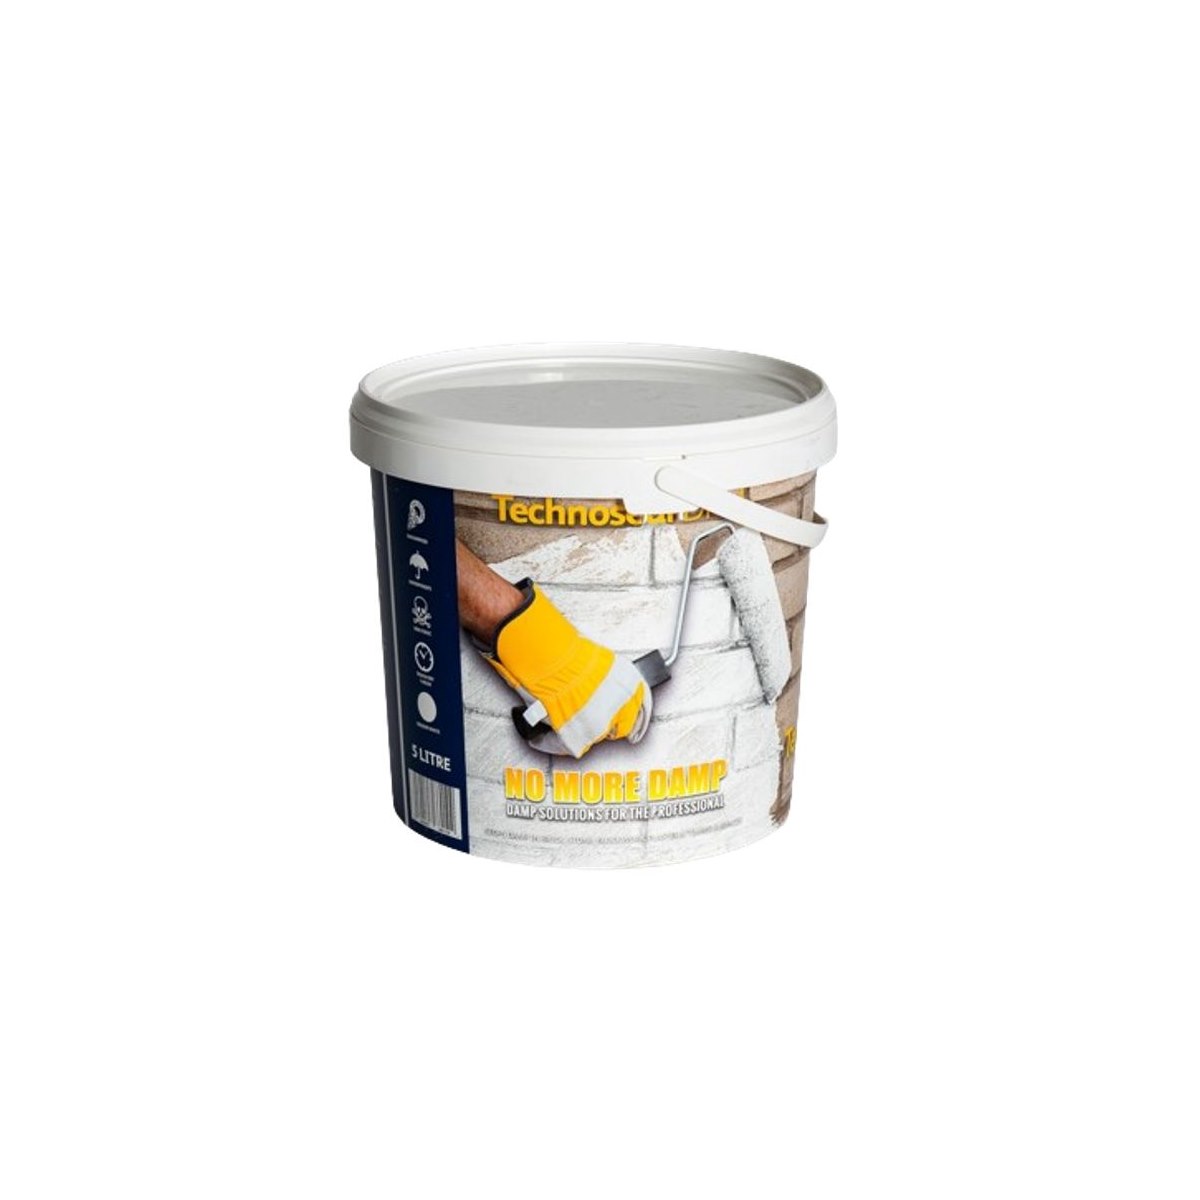 Wykamol Technoseal DPM Damp Proof Paint 5 Litre White